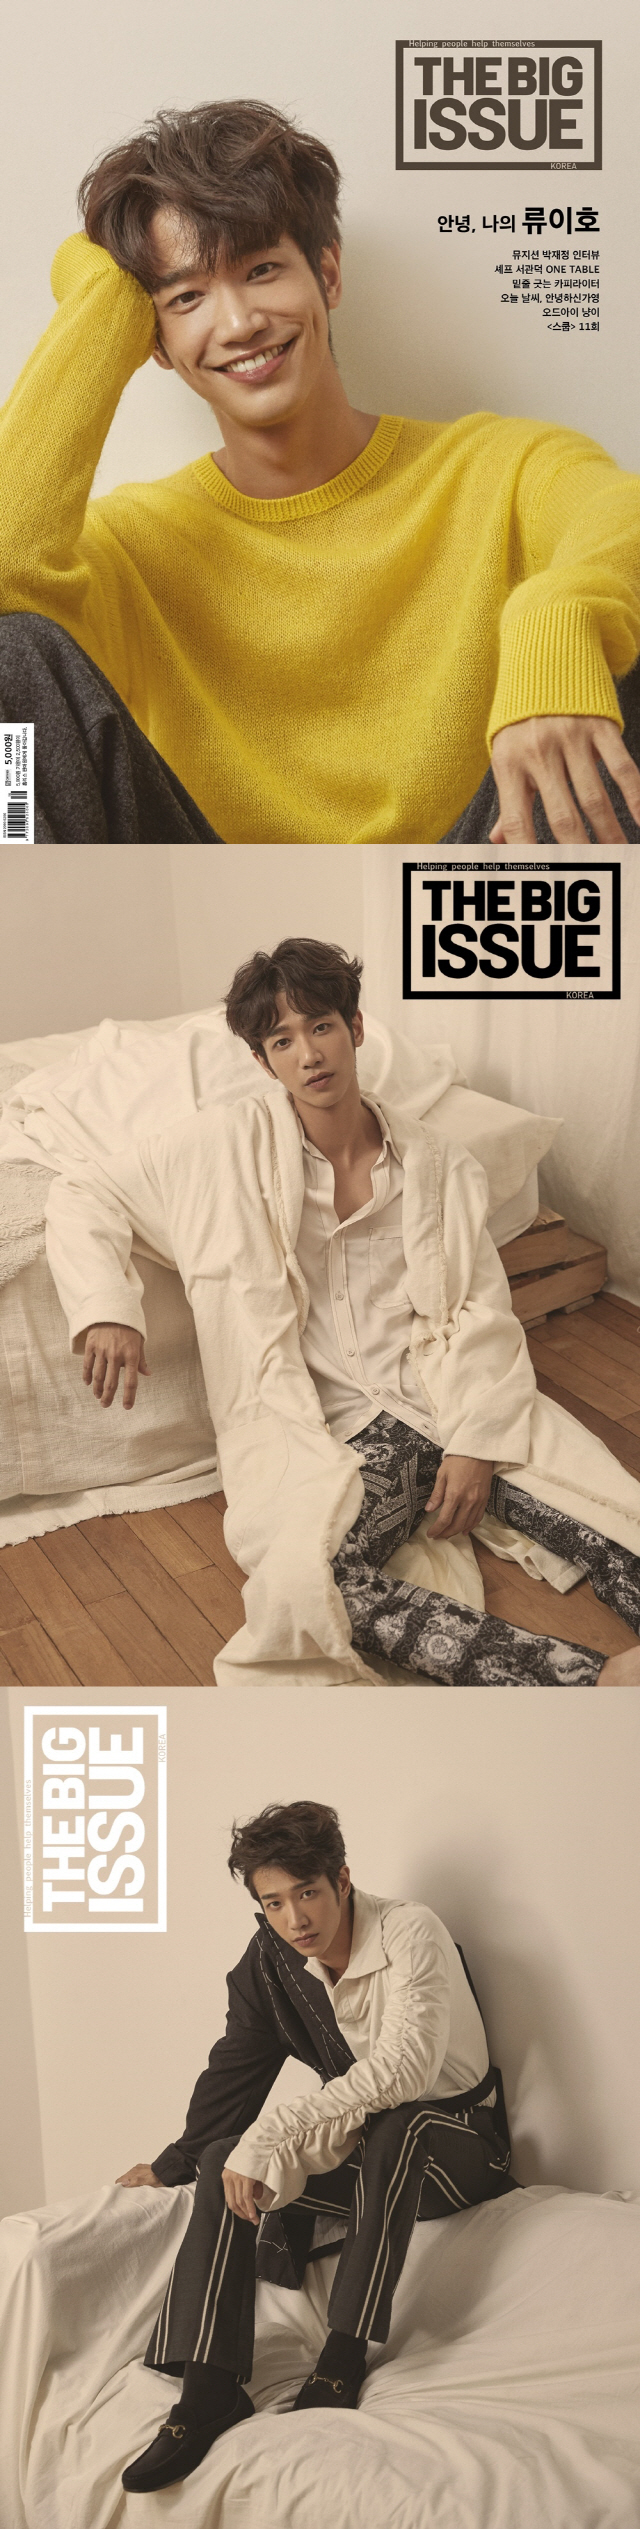 Ryu Ho was selected as a cover model for lifestyle magazine big issue released on September 1, and took pictures and interviews.Ryu Ho not only joined the big issue despite his short schedule, but also added meaning to the talent donation by all the staff including interpreters.I know what the magazine Big Issue means, he said in an interview with the film, so I am more pleased and excited about this shooting schedule than any other work.There are so many good things about Korean dramas and movies. I recently enjoyed TVN drama Why is Secretary Kim?And the movie With God Kim Yong Hwa, Dokjeon Lee Hae Young, and Bong Joon Ho.I want to work on it if I have a relationship with Korean directors someday. Taiwanese Actor Ryu I-ho, who is well known in Korea for his movie Hello, My Girl, will visit Korea again on September 3 to attend the 2018 Seoul Drama Awards.Meanwhile, Big Issue is a magazine that directly connects half of its sales to the income of a Homeless salesperson, which can be purchased at major subway stations in Seoul and online shops for Big Issues, and is published in Korea, the UK, Australia, Japan and Taiwan.Exo Kai, Big Sn, Infinite El, Actor Ryu Jun-yeol, and band Jaurim have recently participated as cover models.